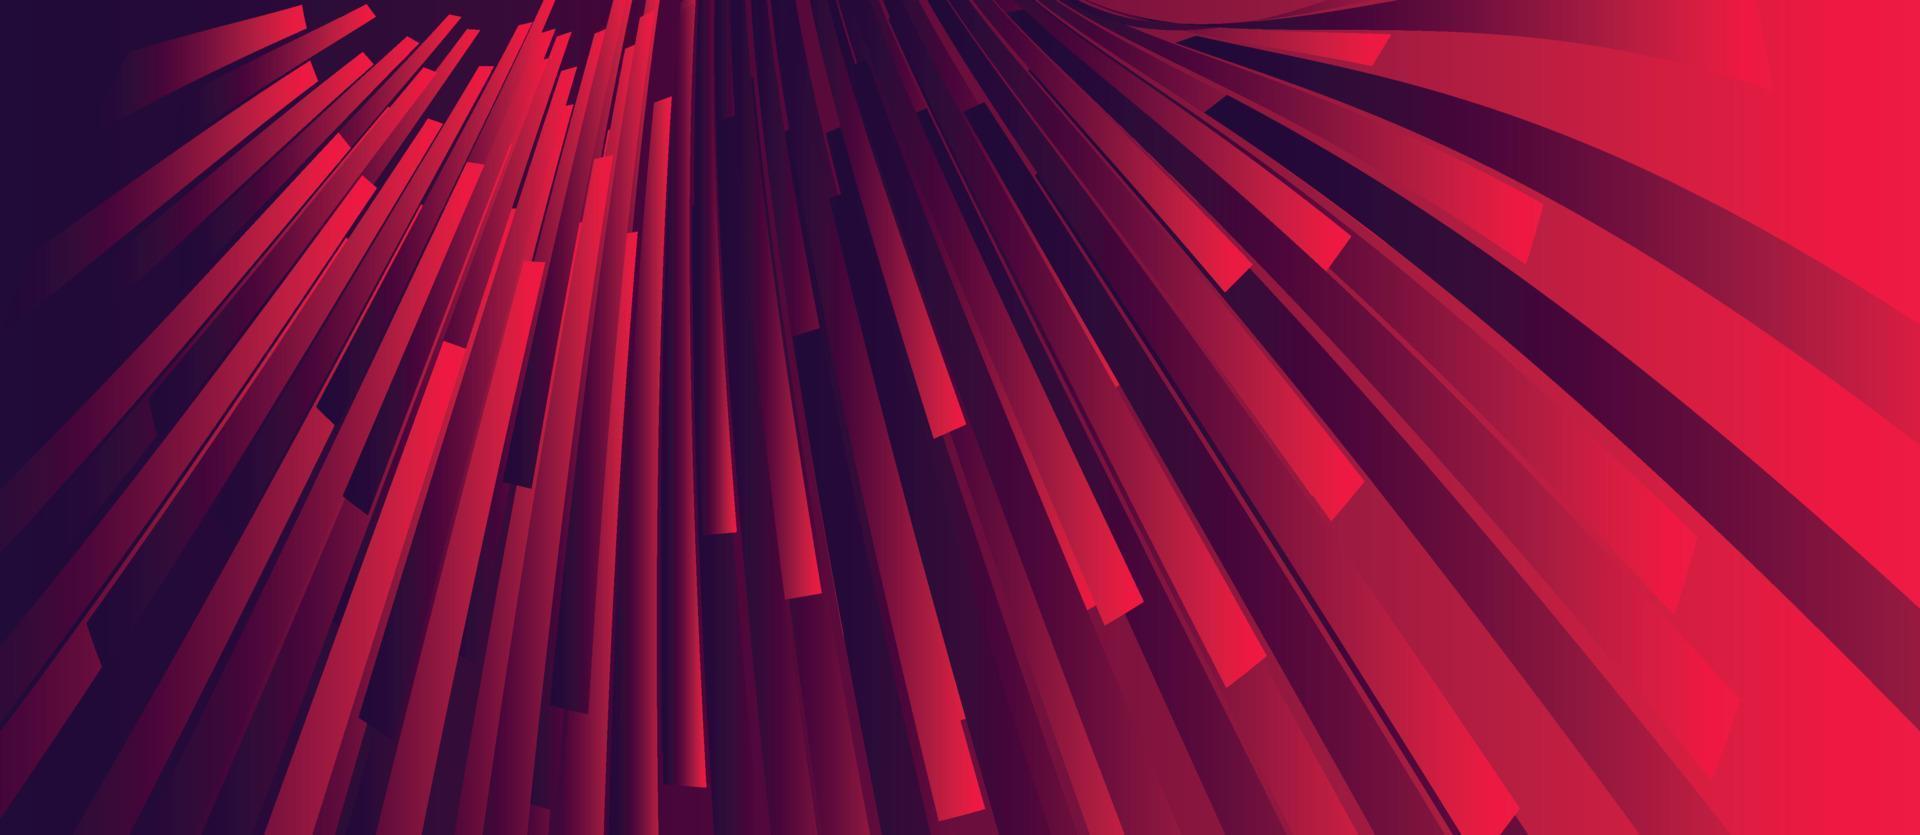 Abstract vector background with red layers